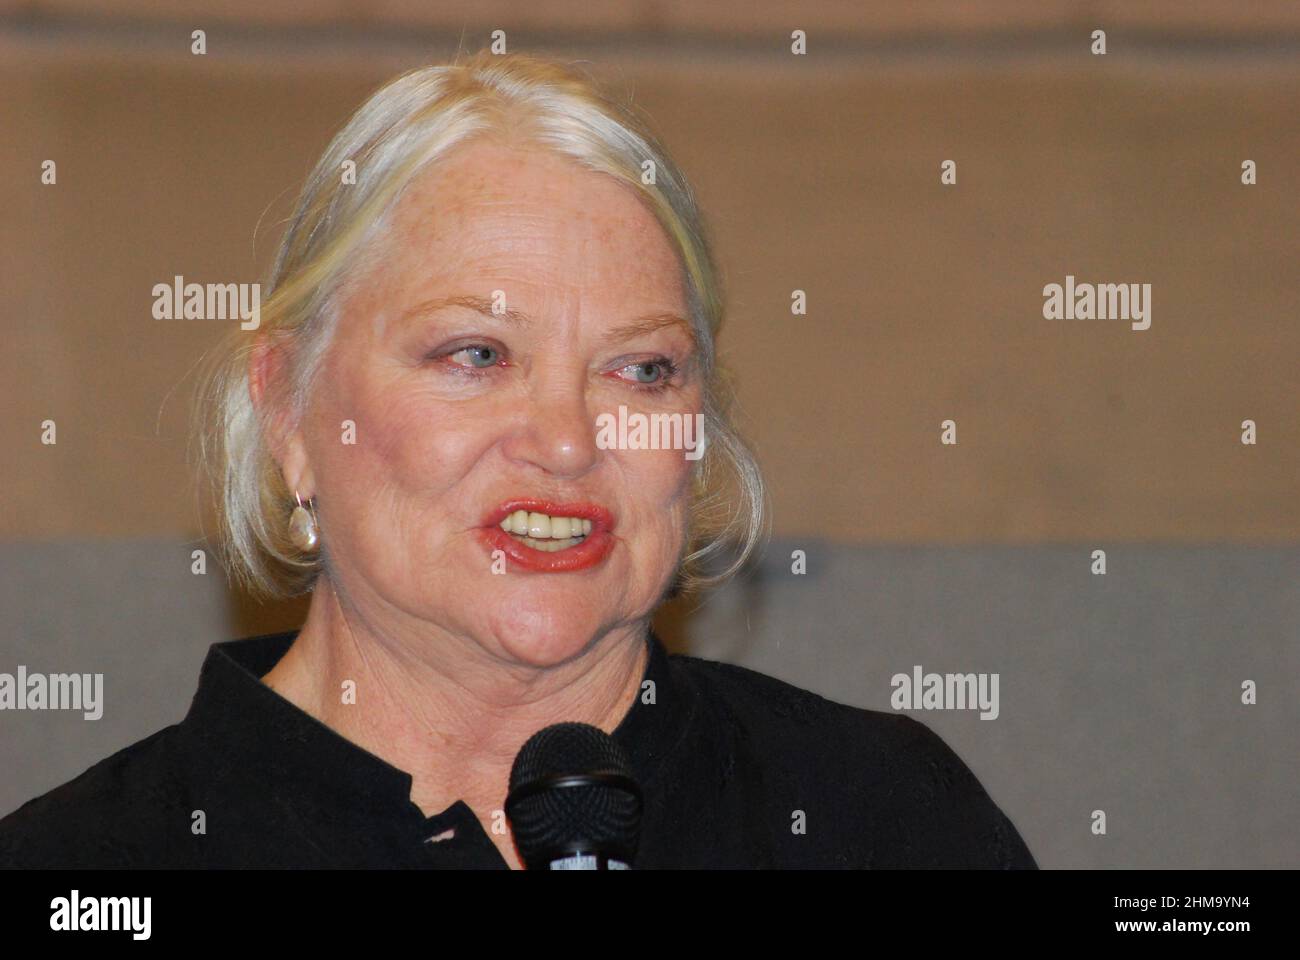 American award-winnning TV, film, and stage actress, Louise Fletcher, best known for Star Trek: Deep Space Nine, and One Flew Over the Cuckoo's Nest. Stock Photo